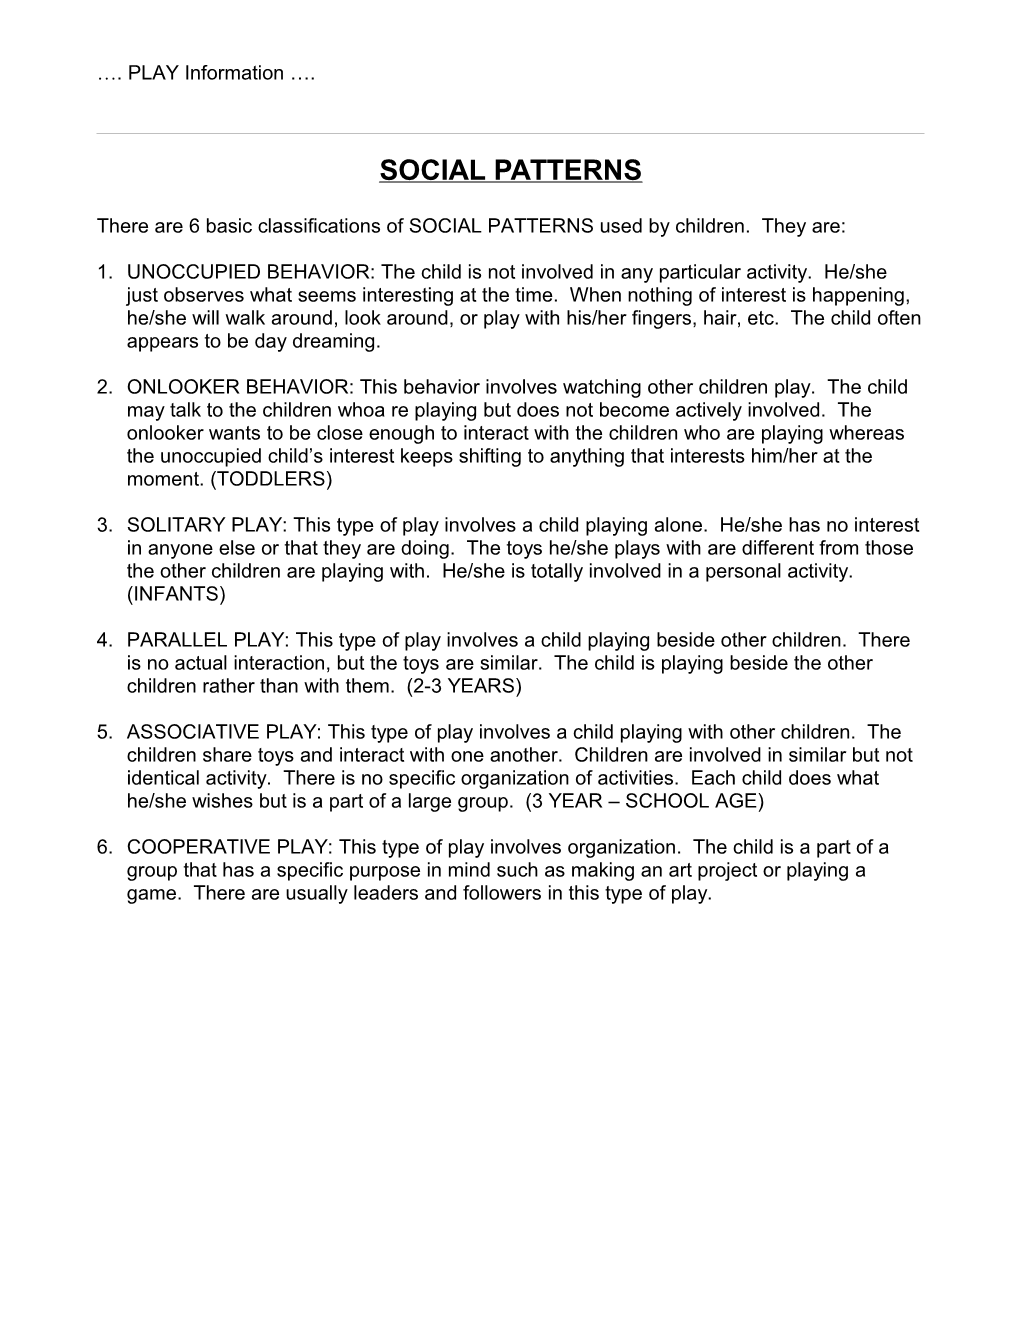 There Are 6 Basic Classifications of SOCIAL PATTERNS Used by Children. They Are